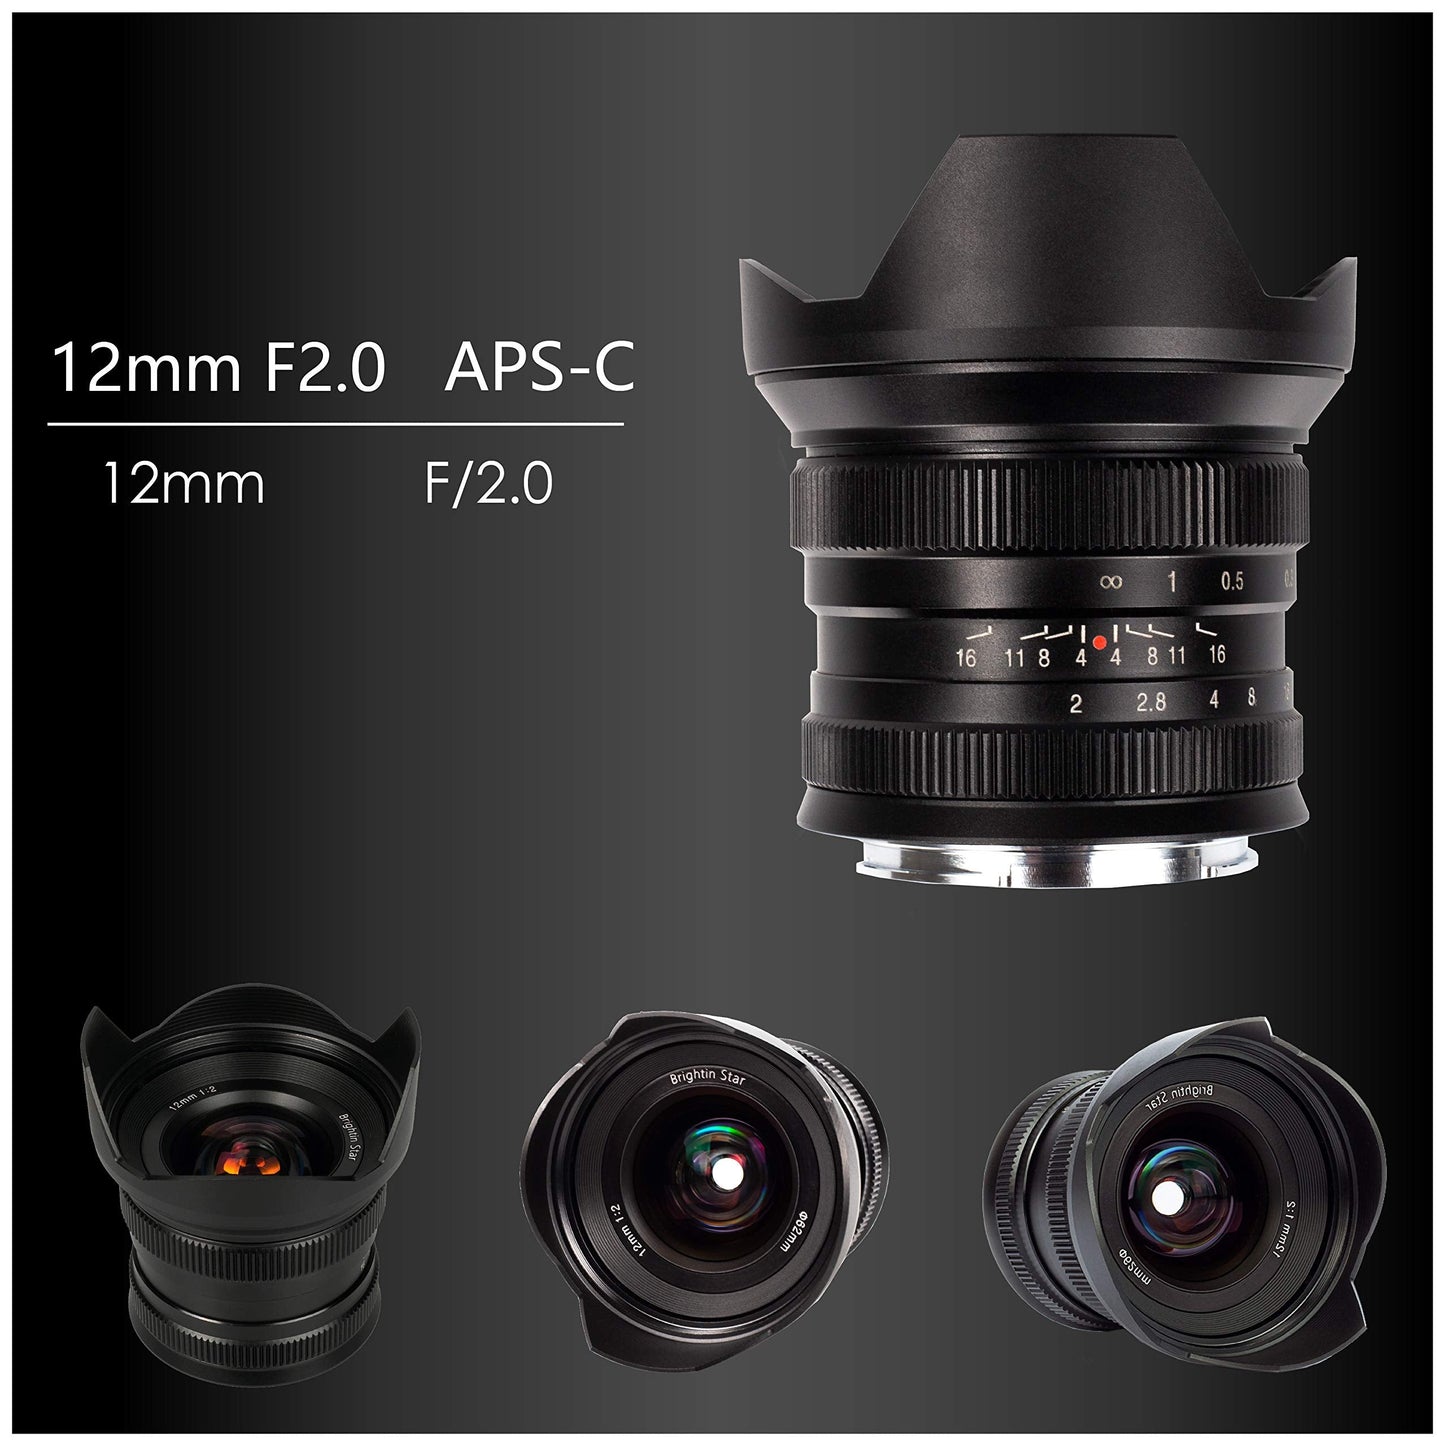 12mm F2.0 Ultra Wide-Angle Big Aperture APS-C Manual Focus Mirrorless Cameras Lens, Fit for Panasonic Olympus Micro4/3 G7, G85, GX9, G7KS, EPM1/2, EM1, E-P1/P2/P3/P5, PL 1/2/3/5/6